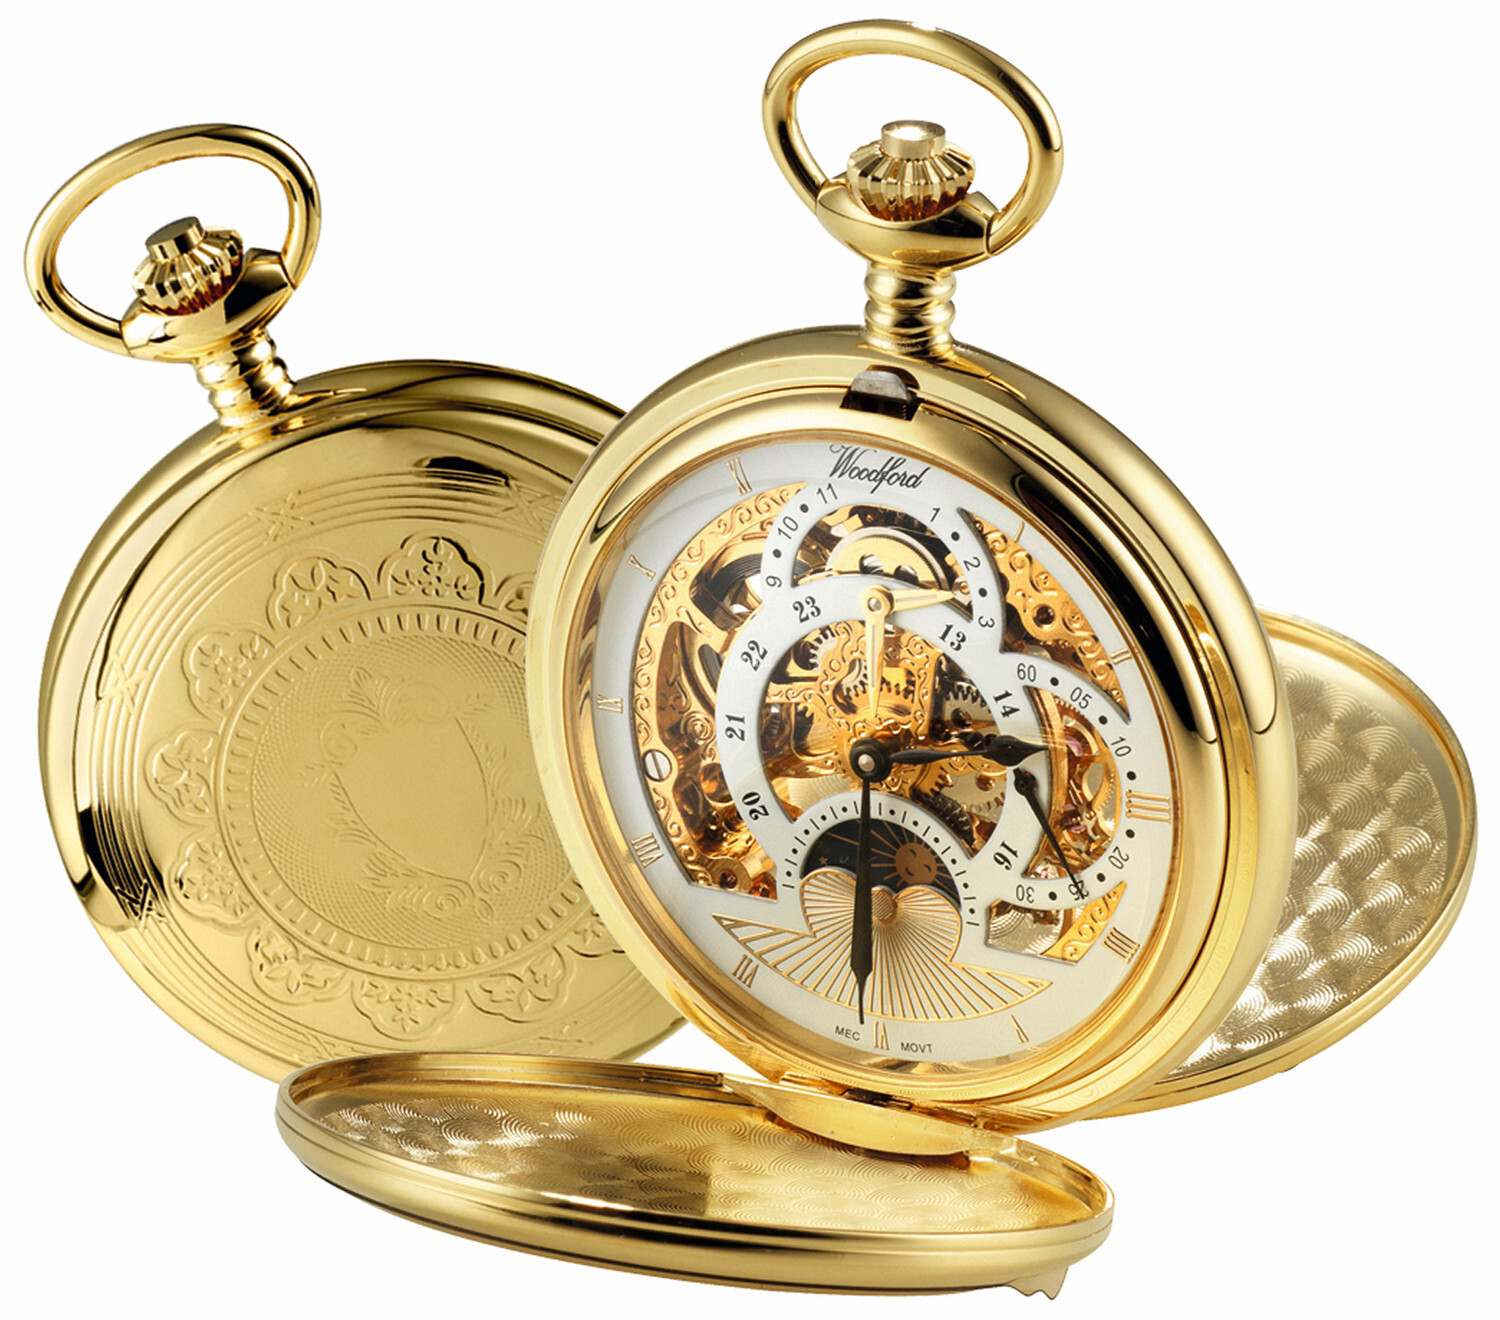 1051 Wedding Cufflinks and Watches from Greenwich Pocket Watch Company ...